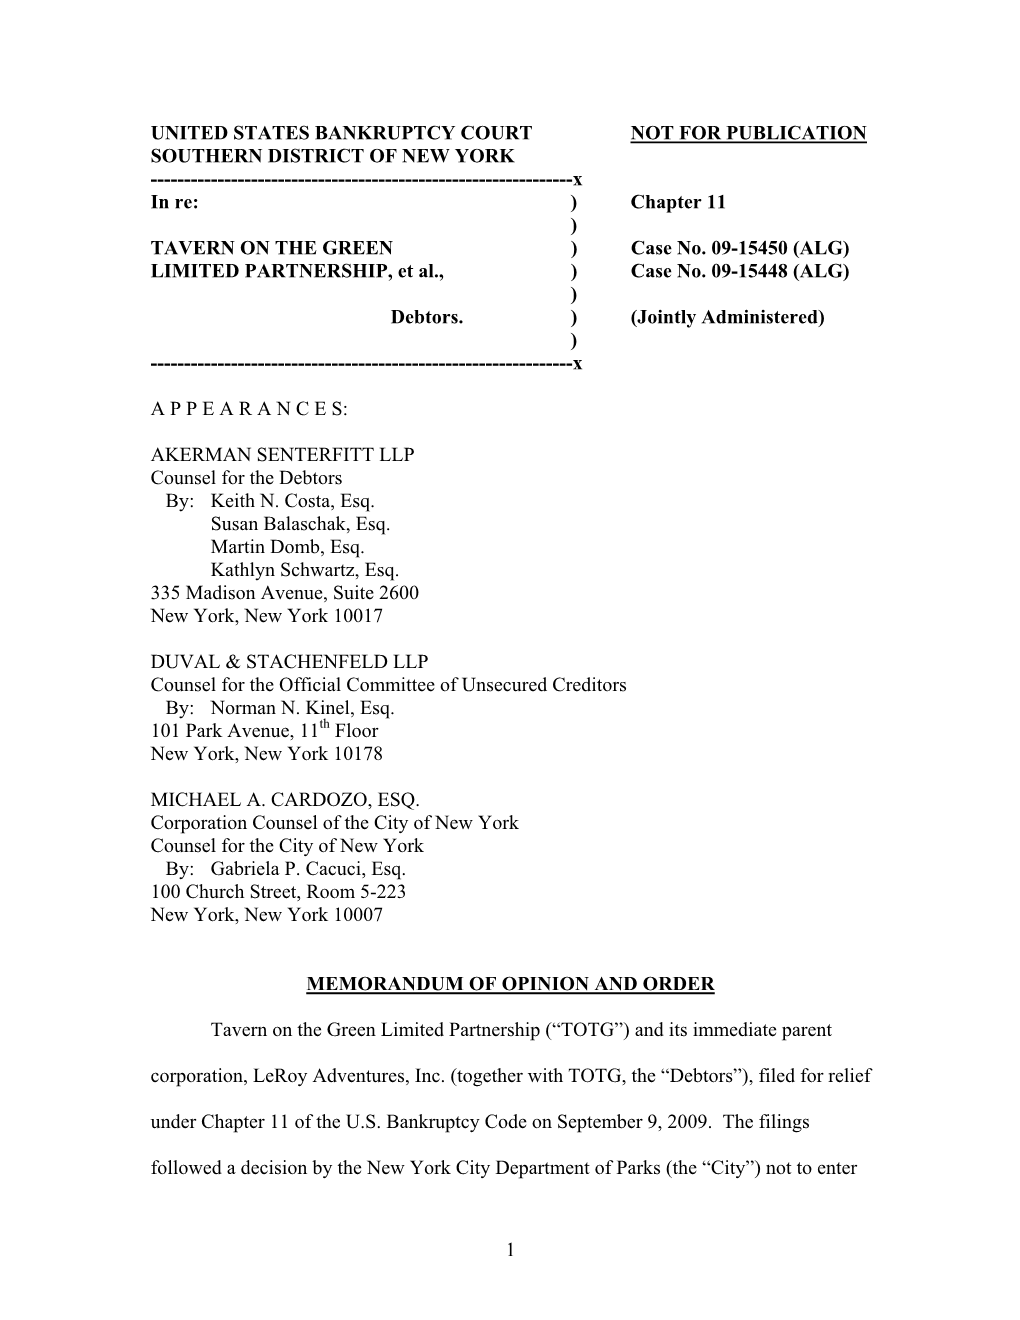 1 United States Bankruptcy Court Not for Publication Southern District of New York